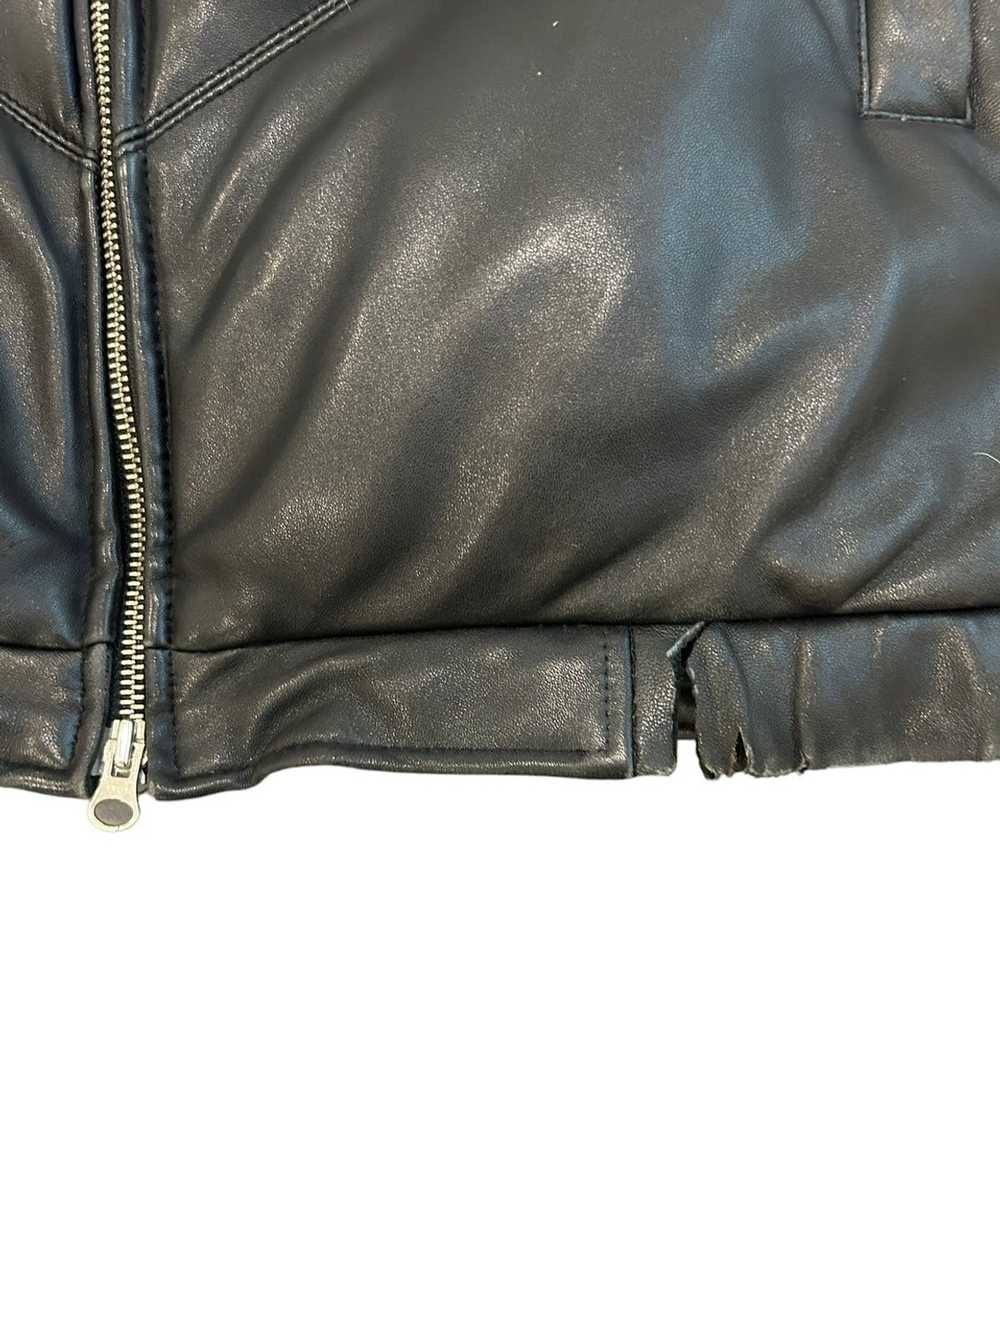 Supreme LEATHER DIWN JACKET / PUFFER - image 3